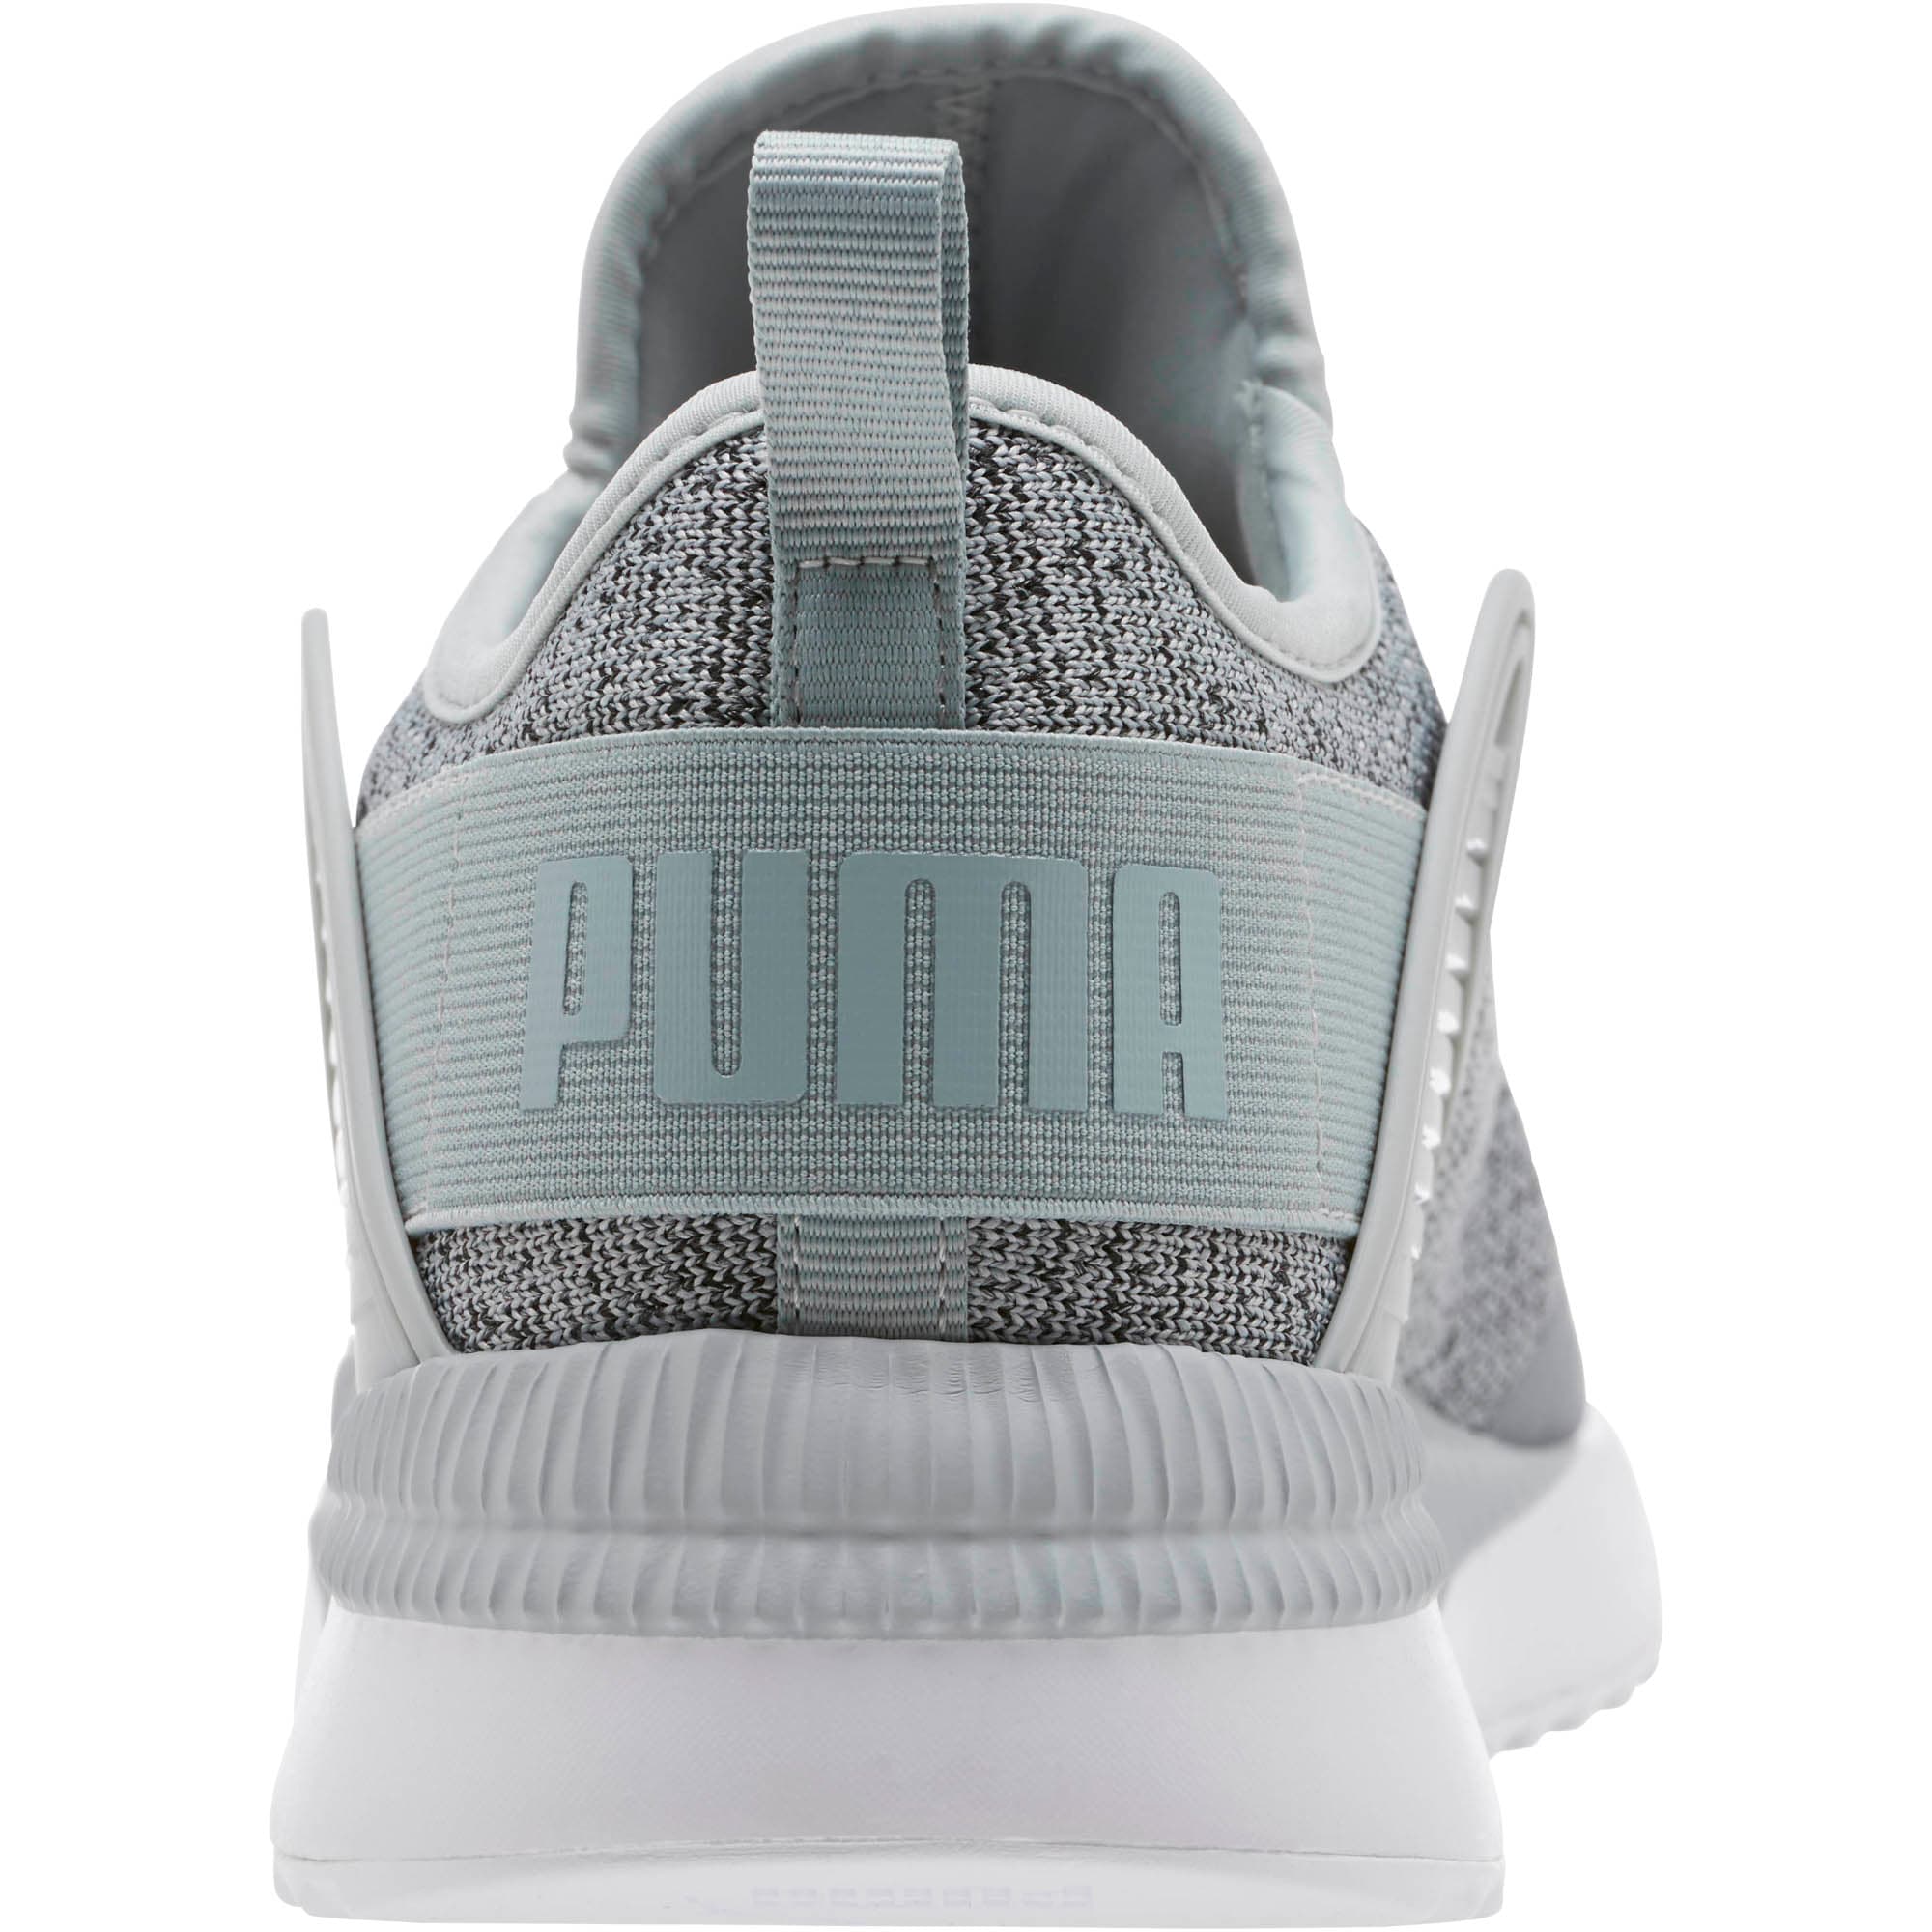 puma men's pacer next cage knit sneaker